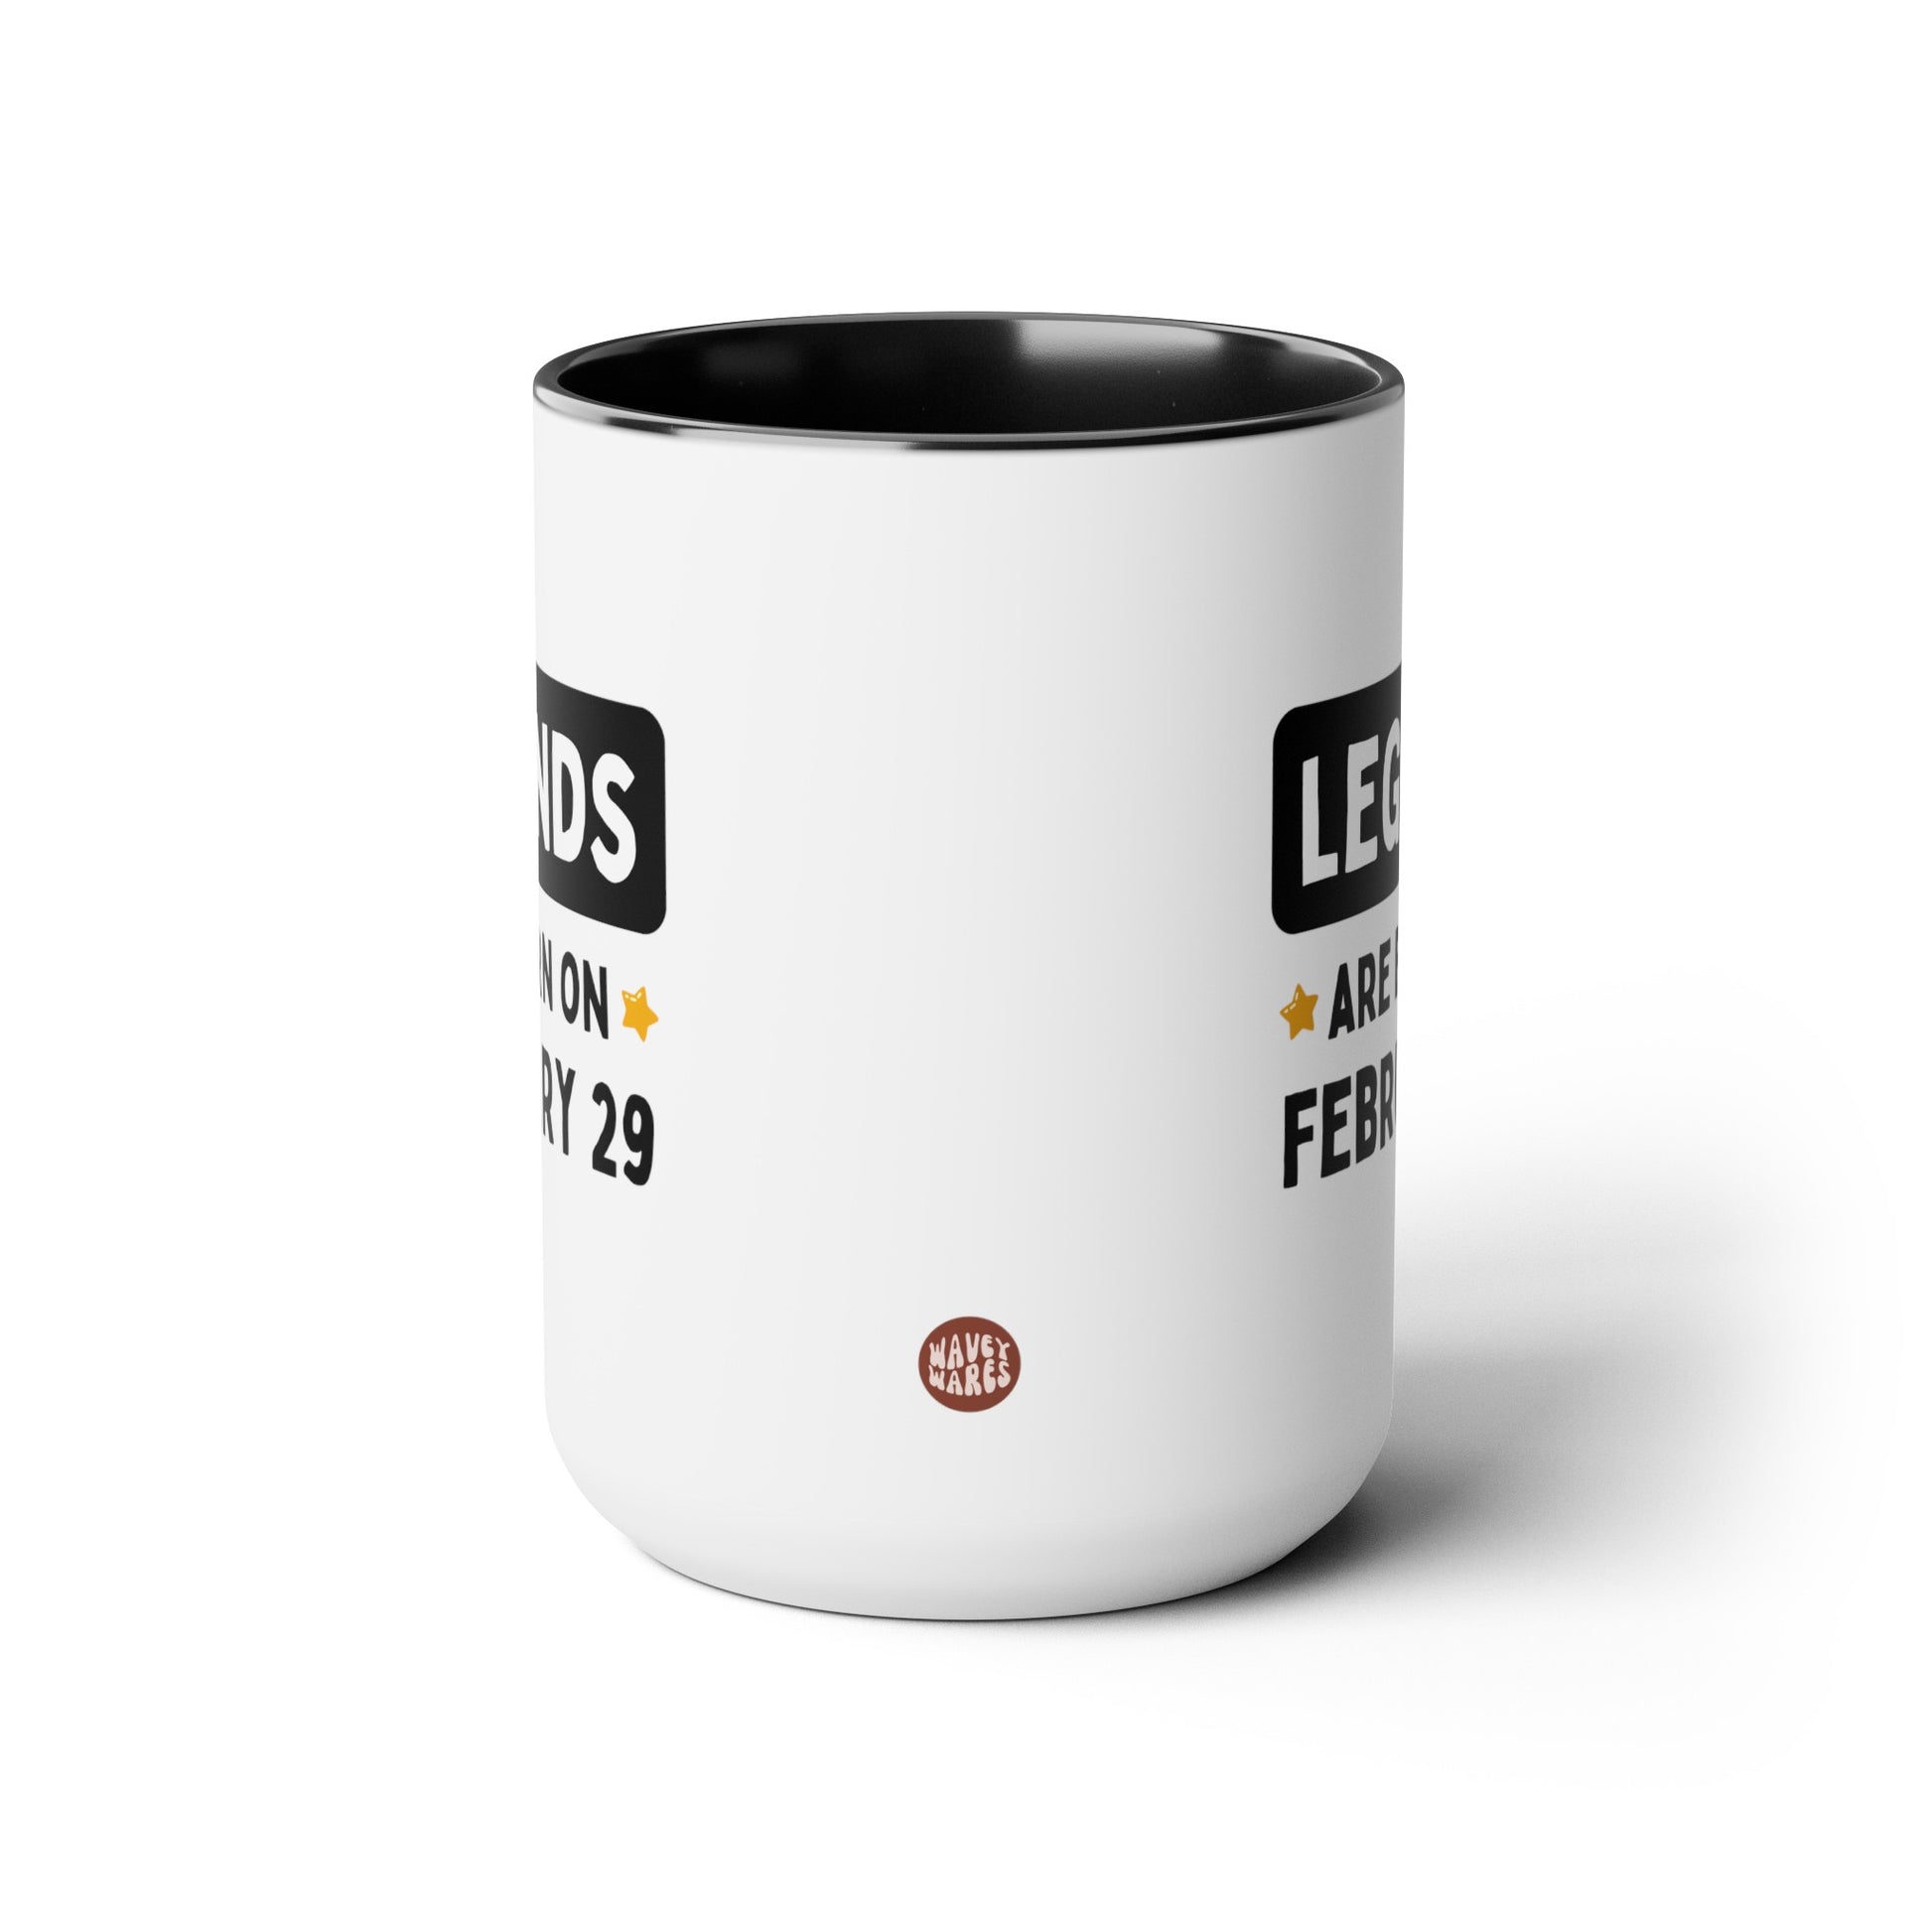 Legends are Born on February 29 15oz white with black accent funny large coffee mug gift for leap year custom birthday date him her best friend personalized waveywares wavey wares wavywares wavy wares side